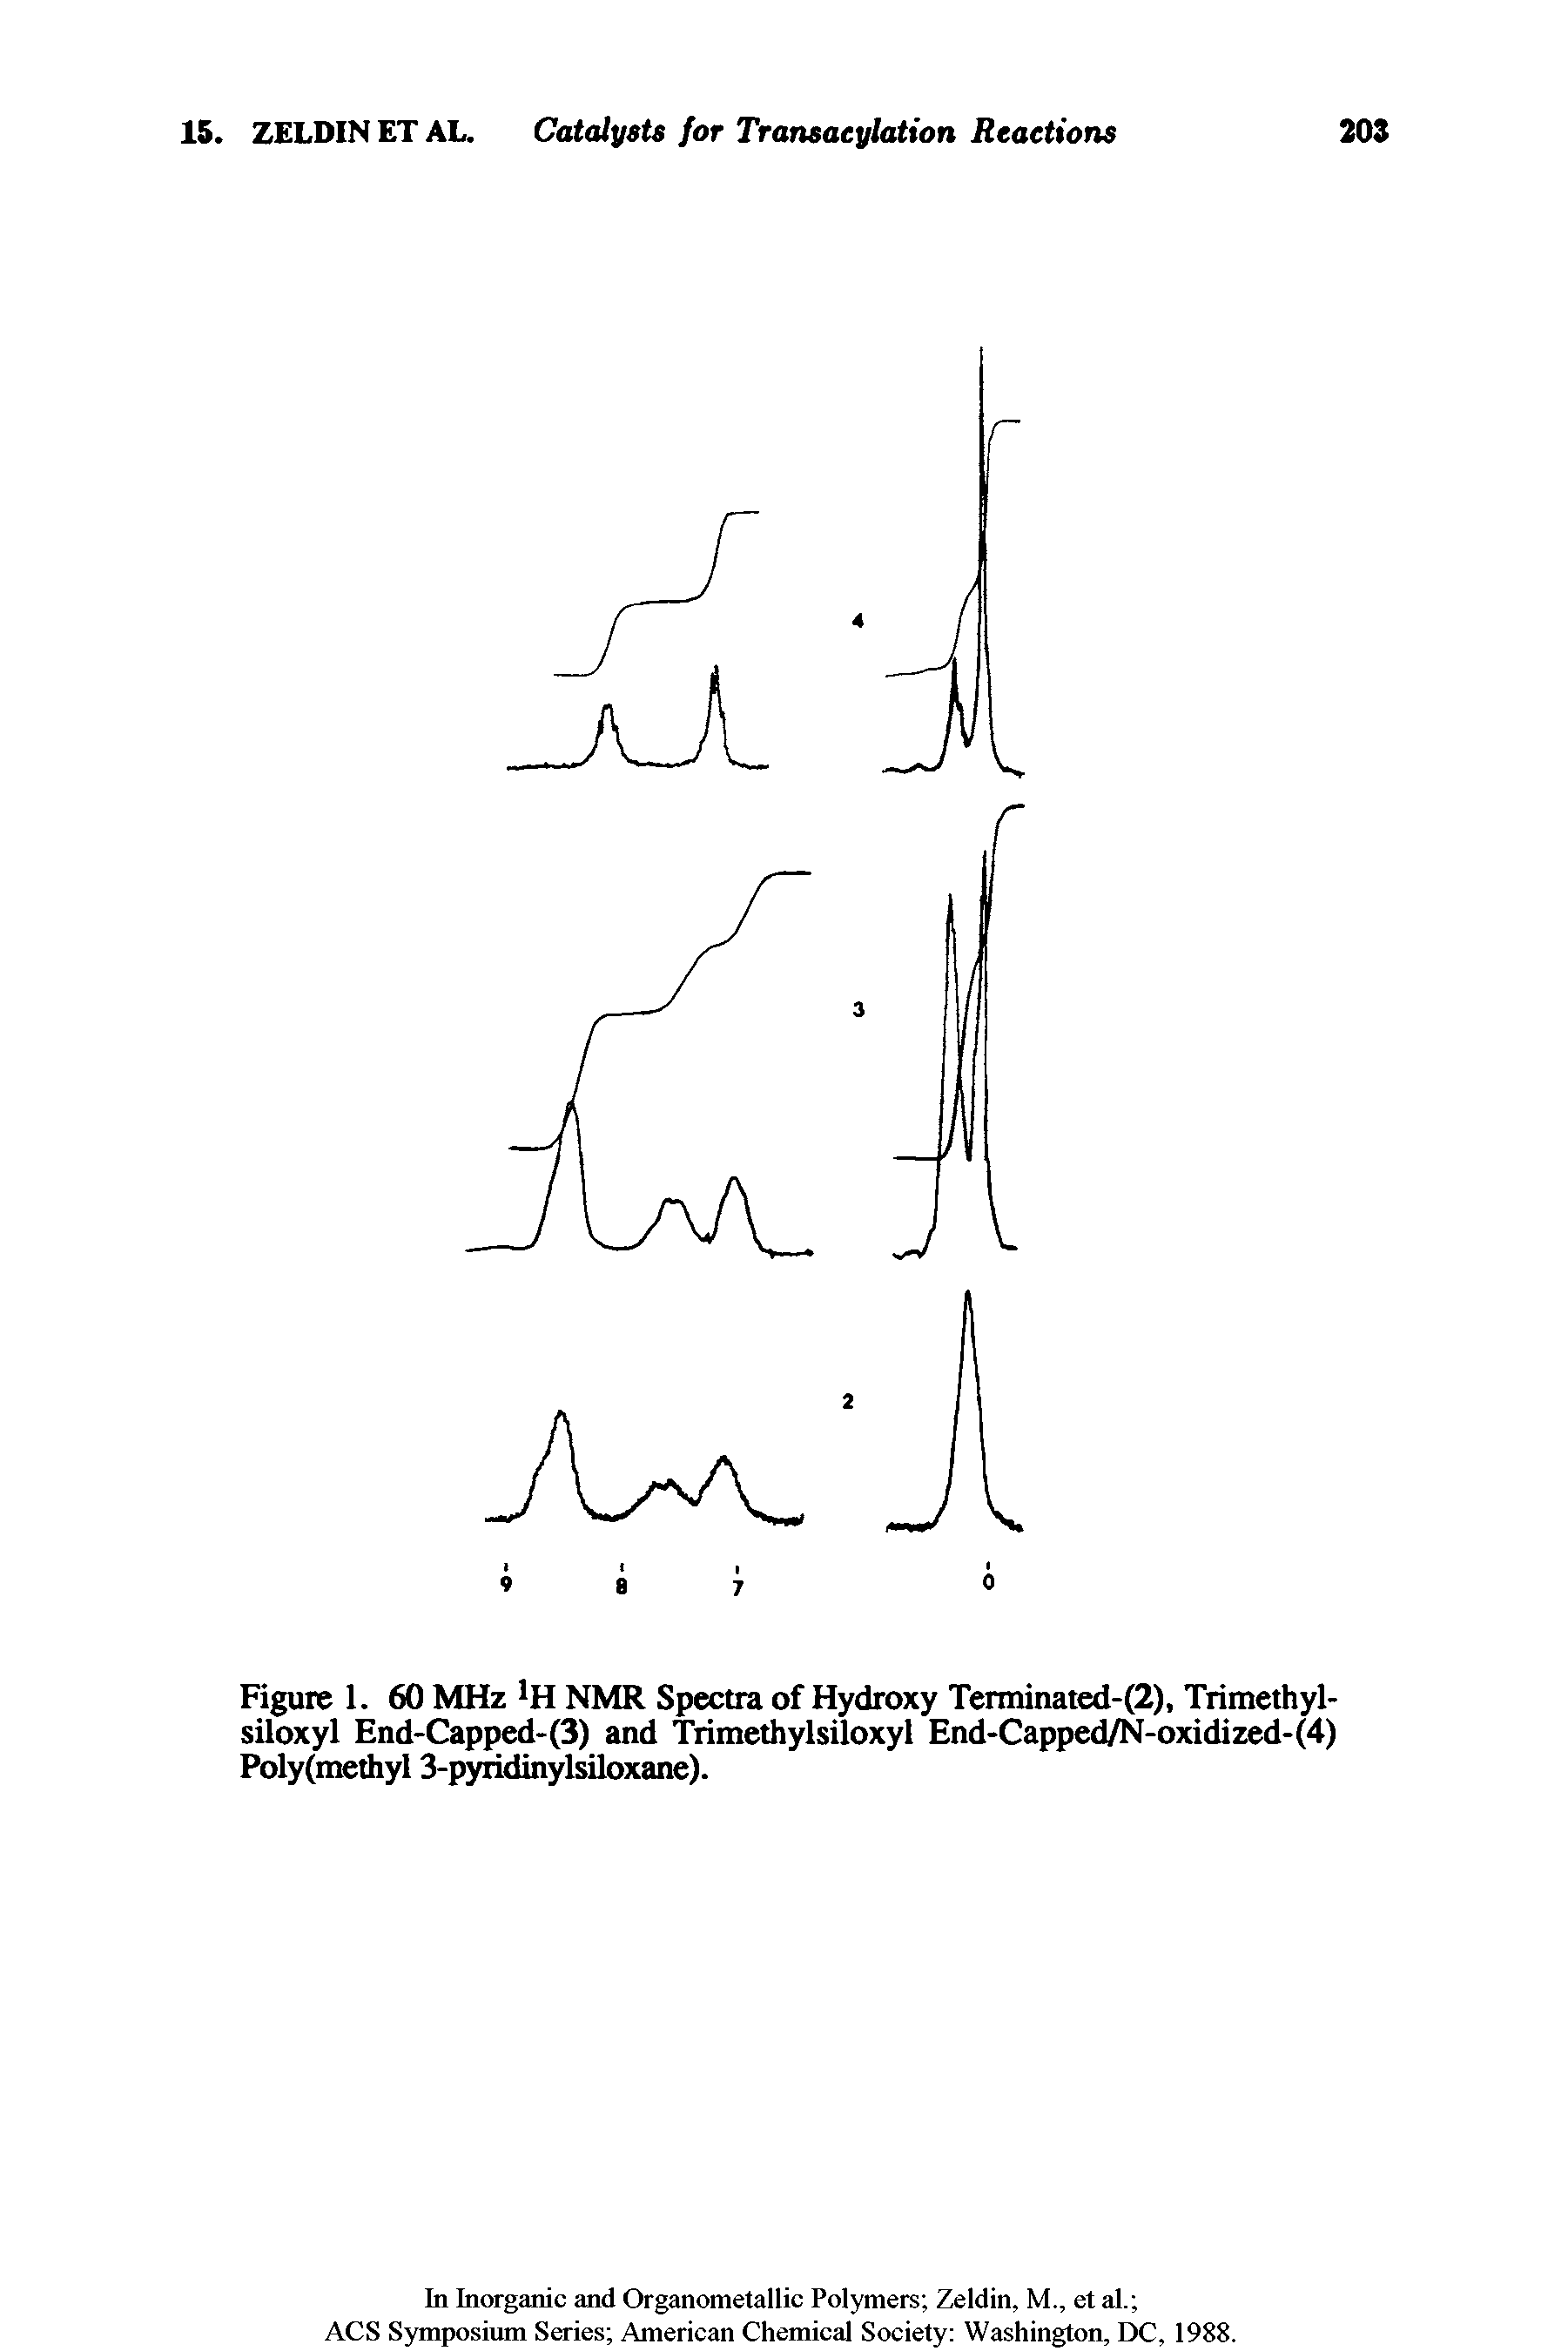 Figure 1. 60 MHz NMR Spectra of Hydroxy Terminated-(2), Trimethyl-siloxyl End-Capped-(3) and Trimethylsiloxyl End-Capped/N-oxidized-(4) Poly(methyl 3-pyridinylsiloxane).